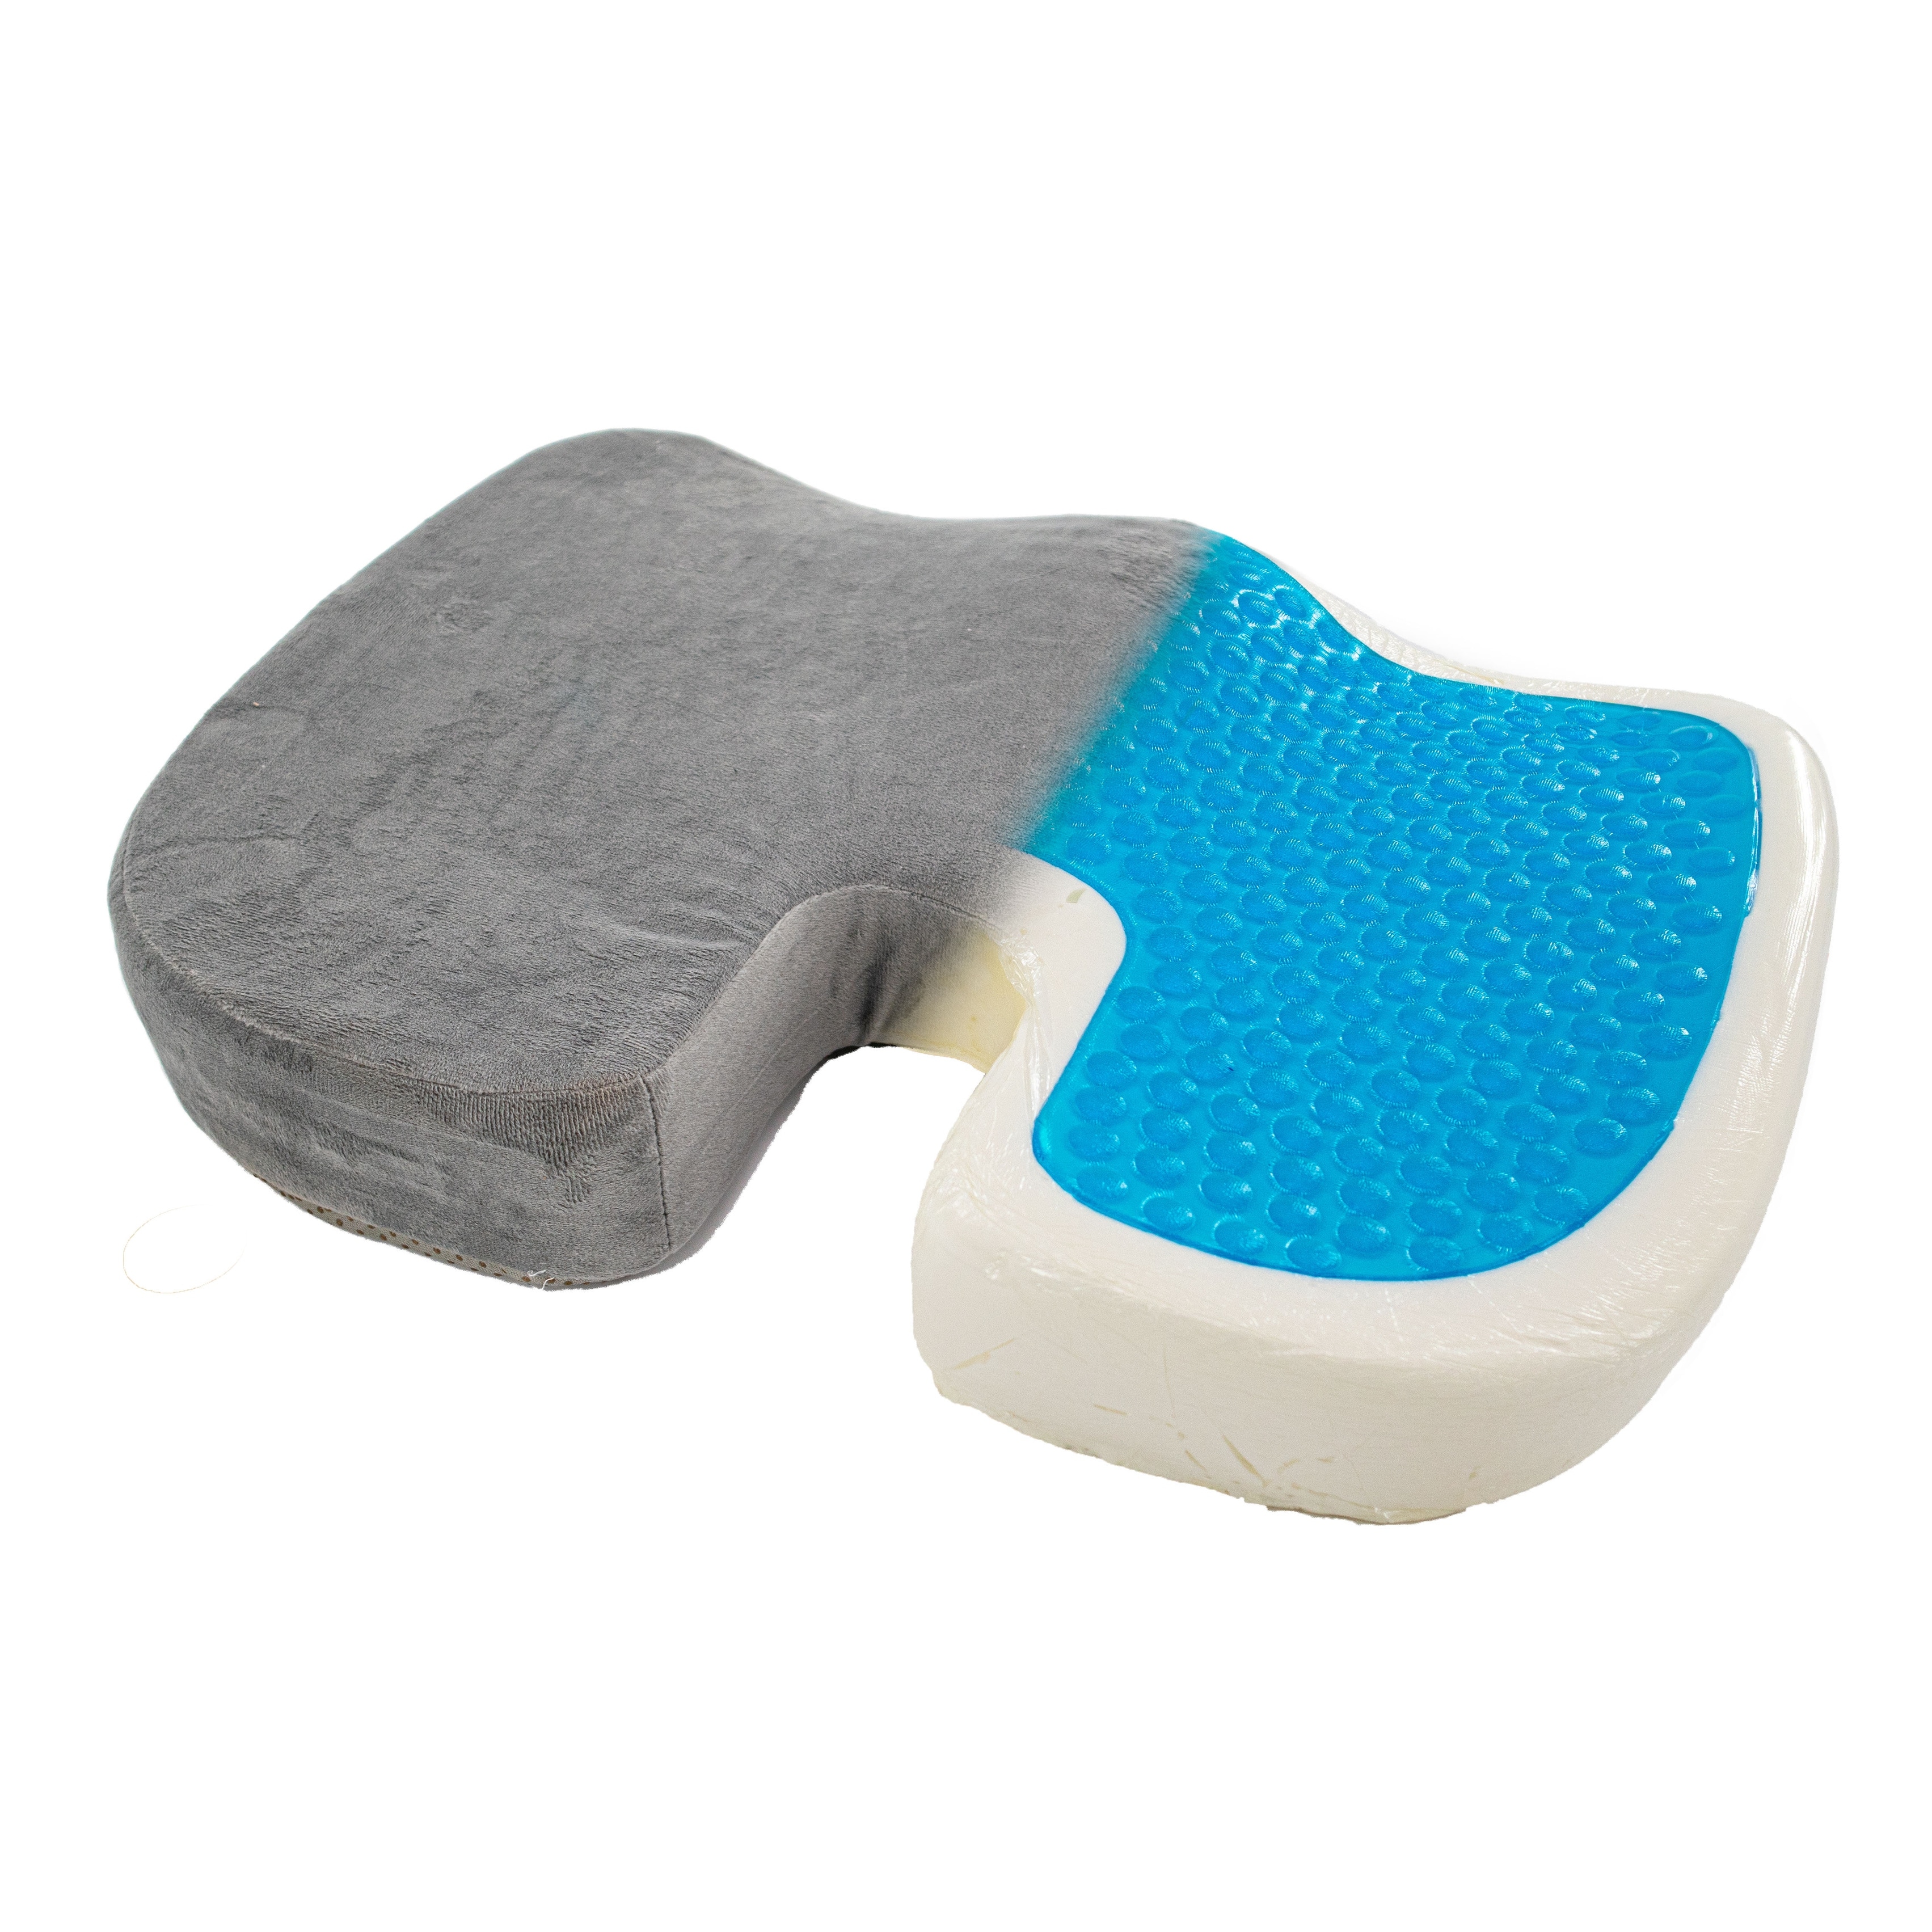 https://ak1.ostkcdn.com/images/products/is/images/direct/8f8dce9b877e373477dac0343f67e4c424c8d7df/Memory-Foam-Cooling-Gel-Seat-Cushion-Enhanced-Orthopedic-Contour-Coccy-Cushion.jpg